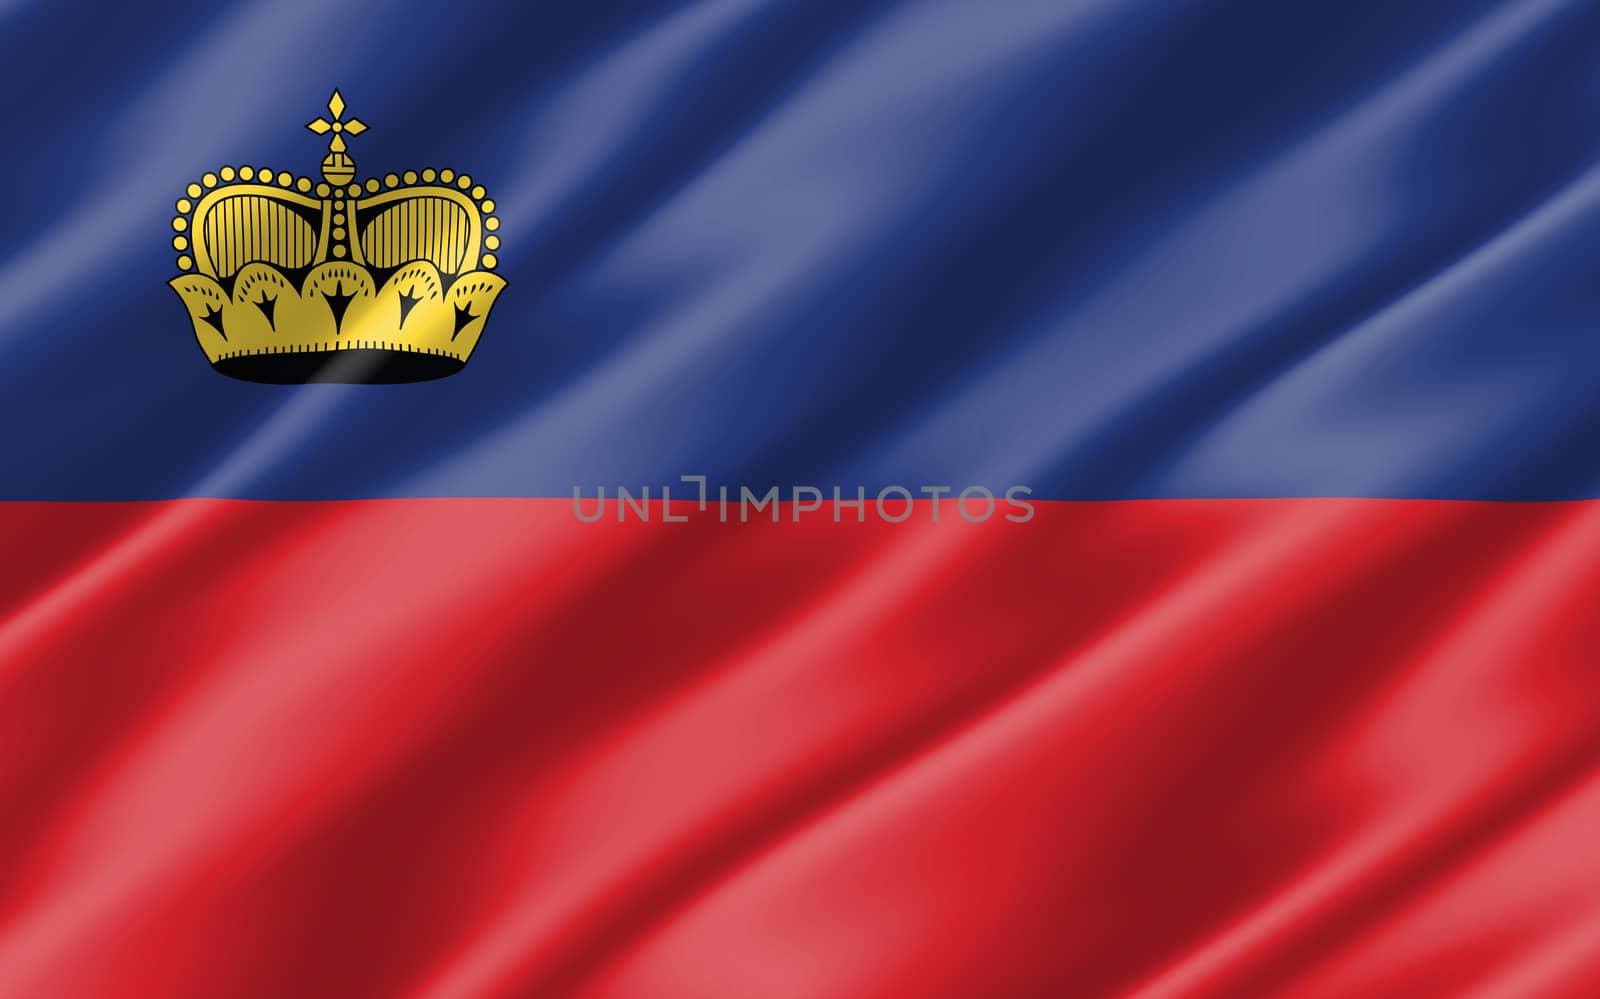 Silk wavy flag of Liechtenstein graphic. Wavy Liechtensteiner flag illustration. Rippled Liechtenstein country flag is a symbol of freedom, patriotism and independence. by Skylark